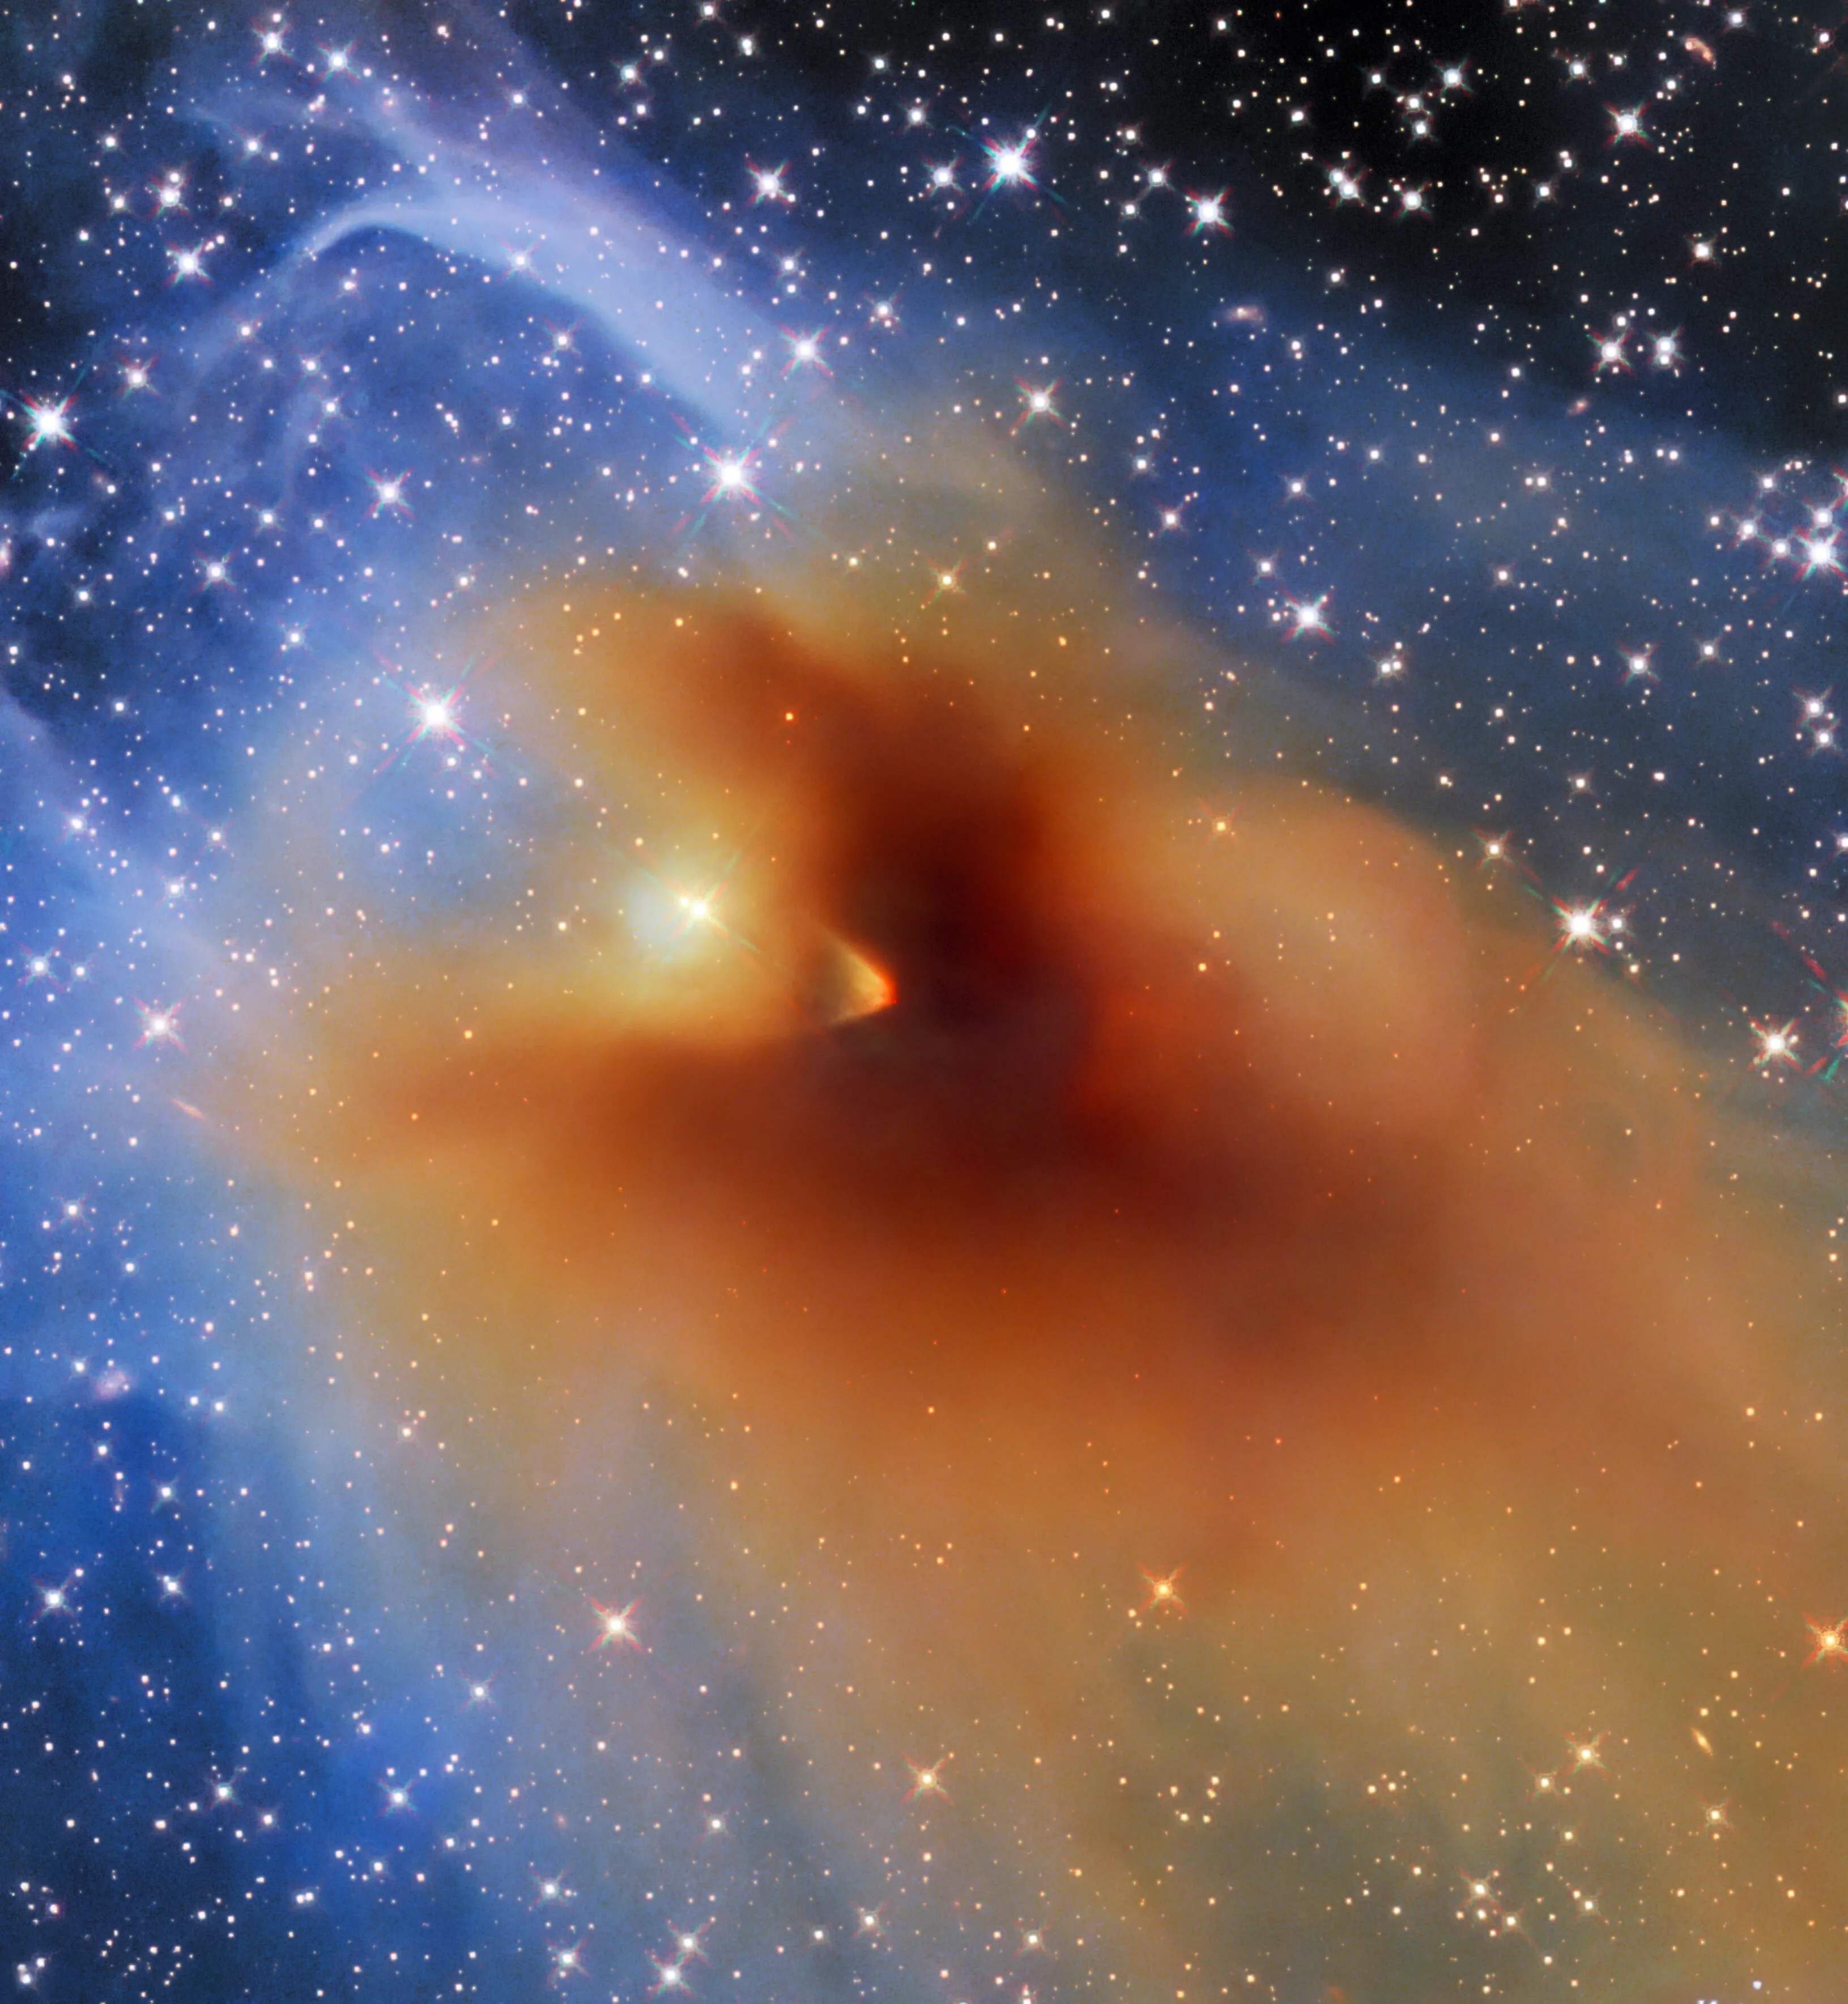 An irregularly shaped bright orange cloud dense gas and dust, which appears darker and more compact at center and is outlined by thinner gas and dust in light shades of blue. a multitude of bright stars against a black background.